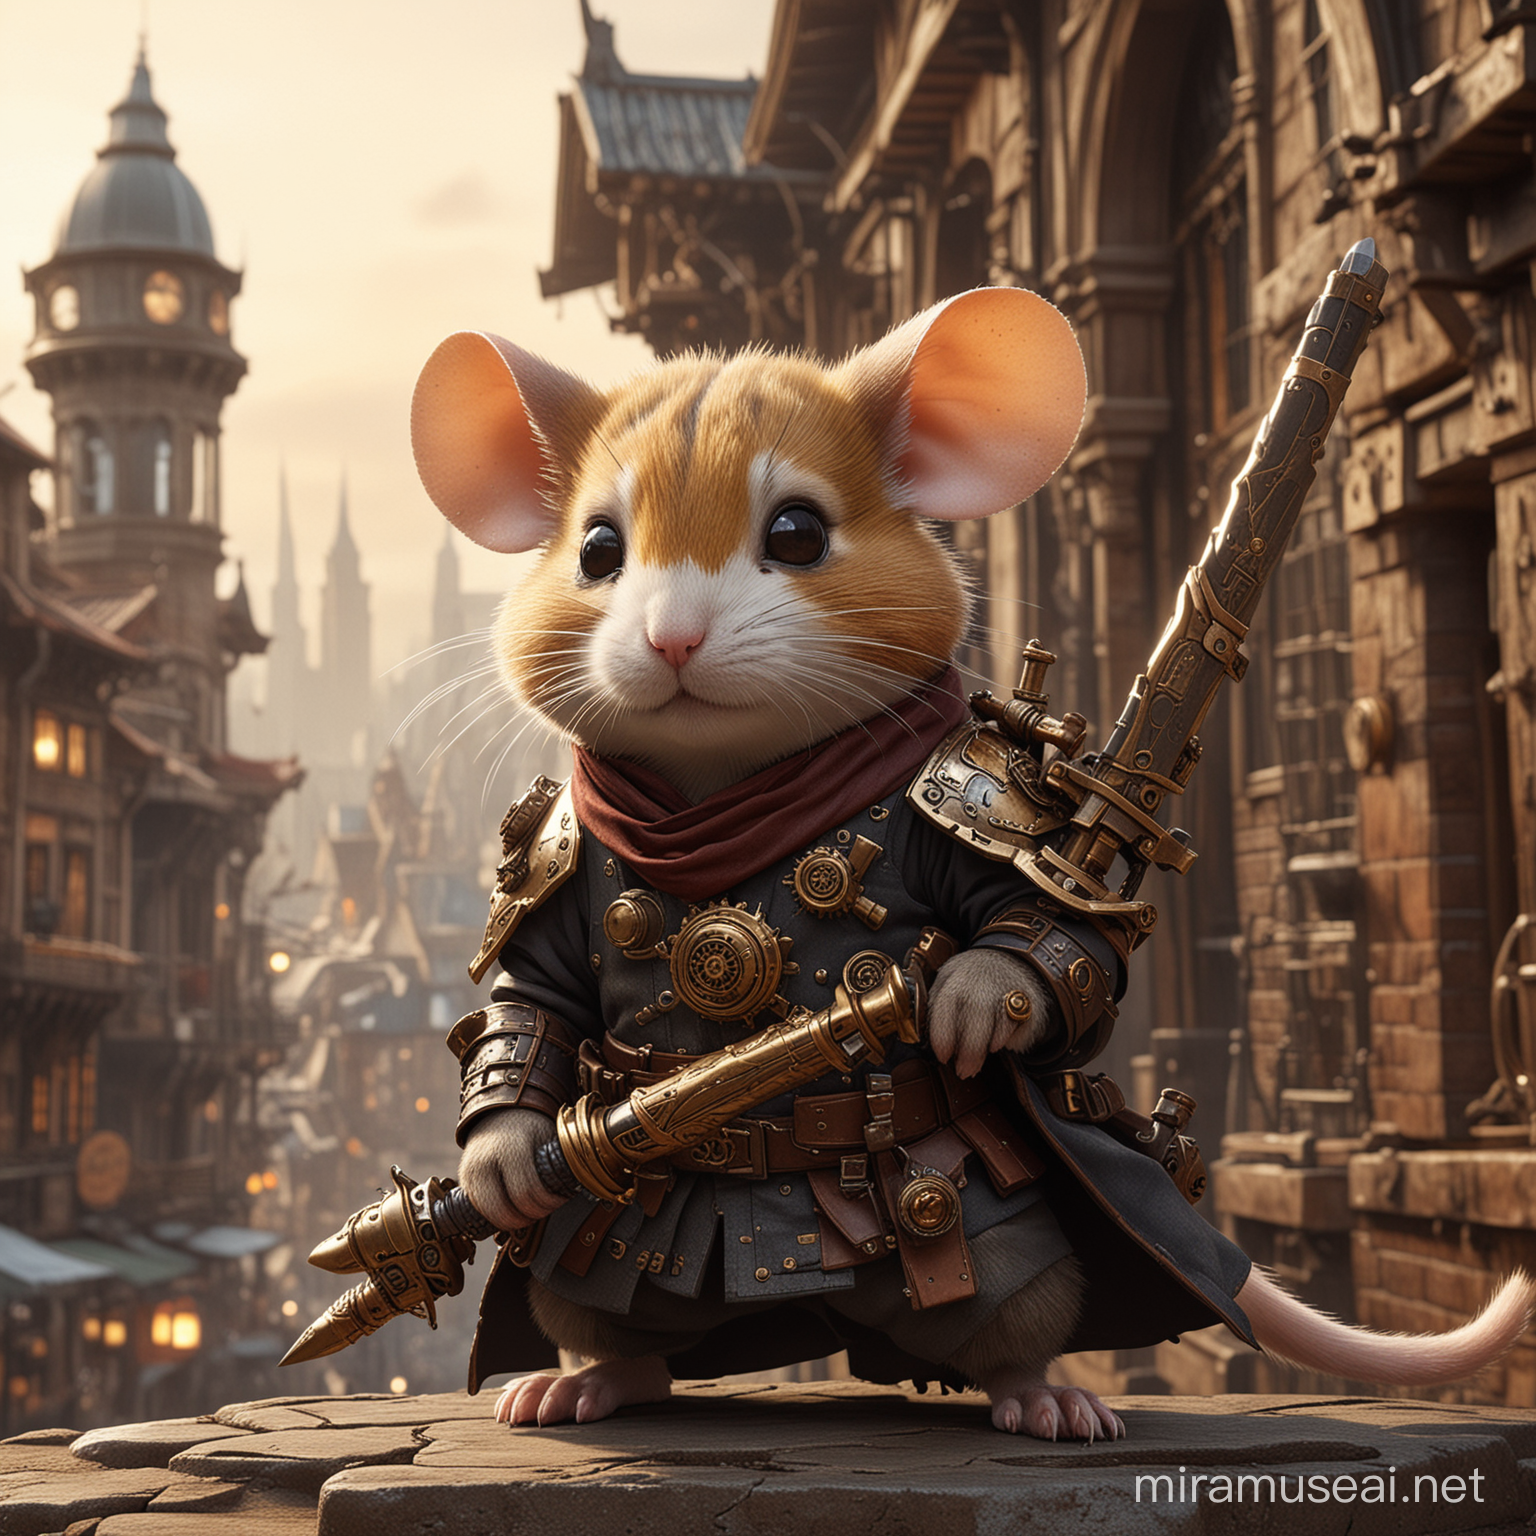 A captivating cinematic portrayal of a steampunk ninjas mouse. The hamsters is dressed in an intricately detailed armor adorned with bronze and cog-like elements. It wields a sleek sword with a futuristic design and carries a small but powerful steampunk-style gun. The background reveals a dimly lit, gritty cityscape with a mix of ancient and modern architectural styles, creating a visually striking atmosphere., cinematic, write a bold typography text center "Where is the cat, Hans?"